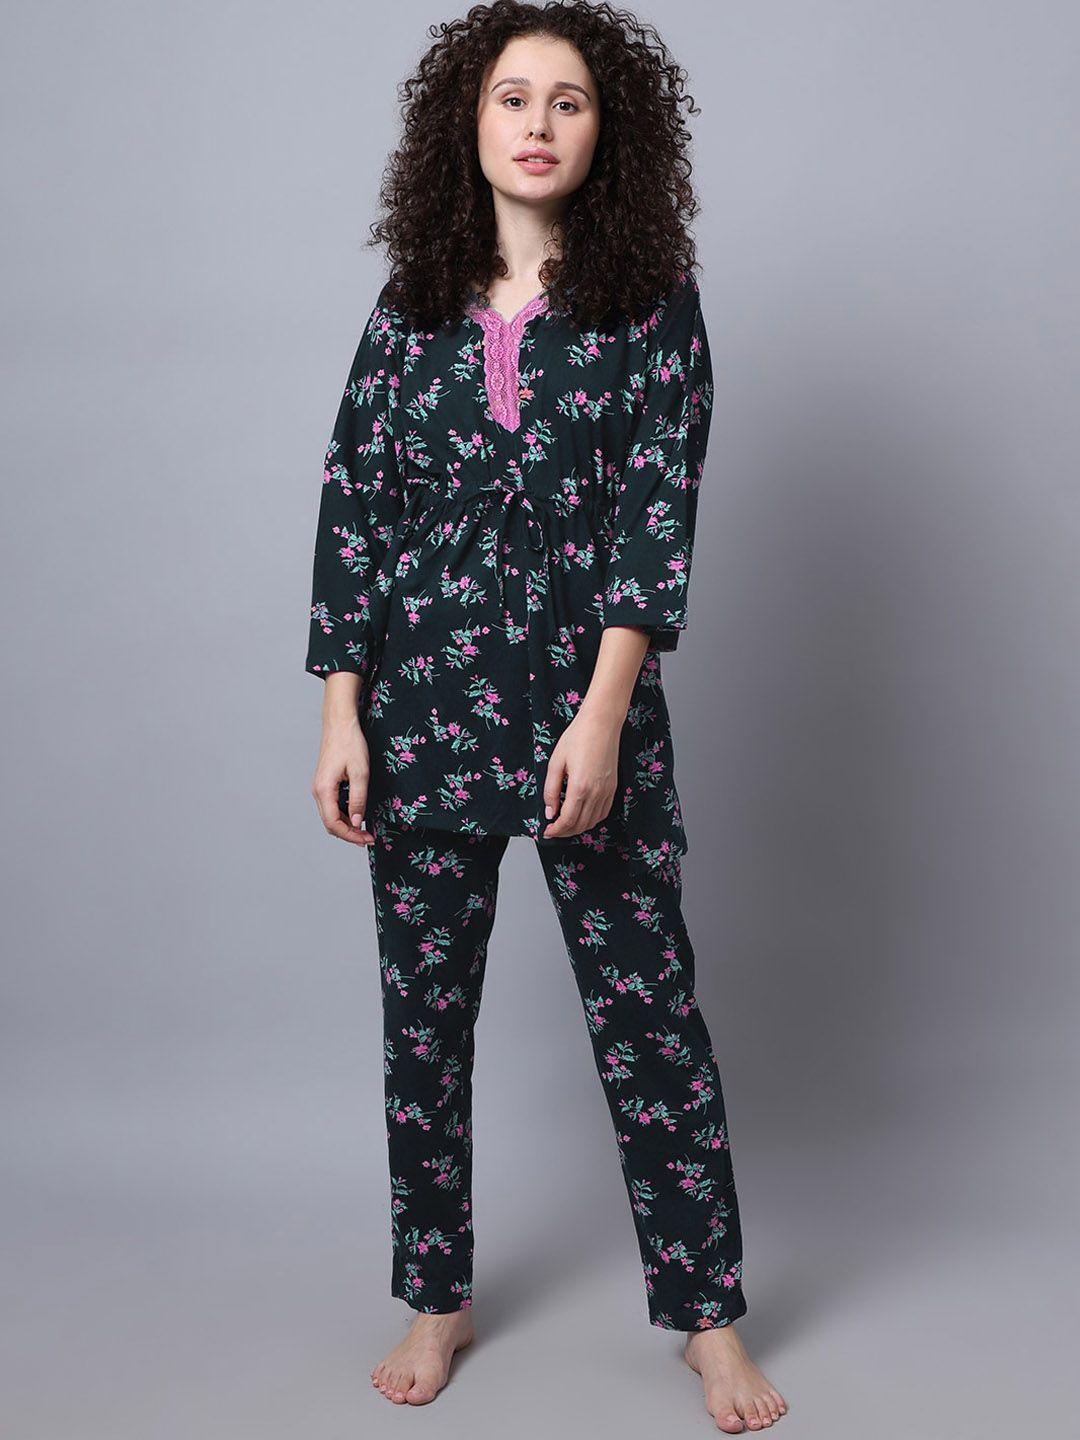 kanvin women teal and pink floral printed night suit